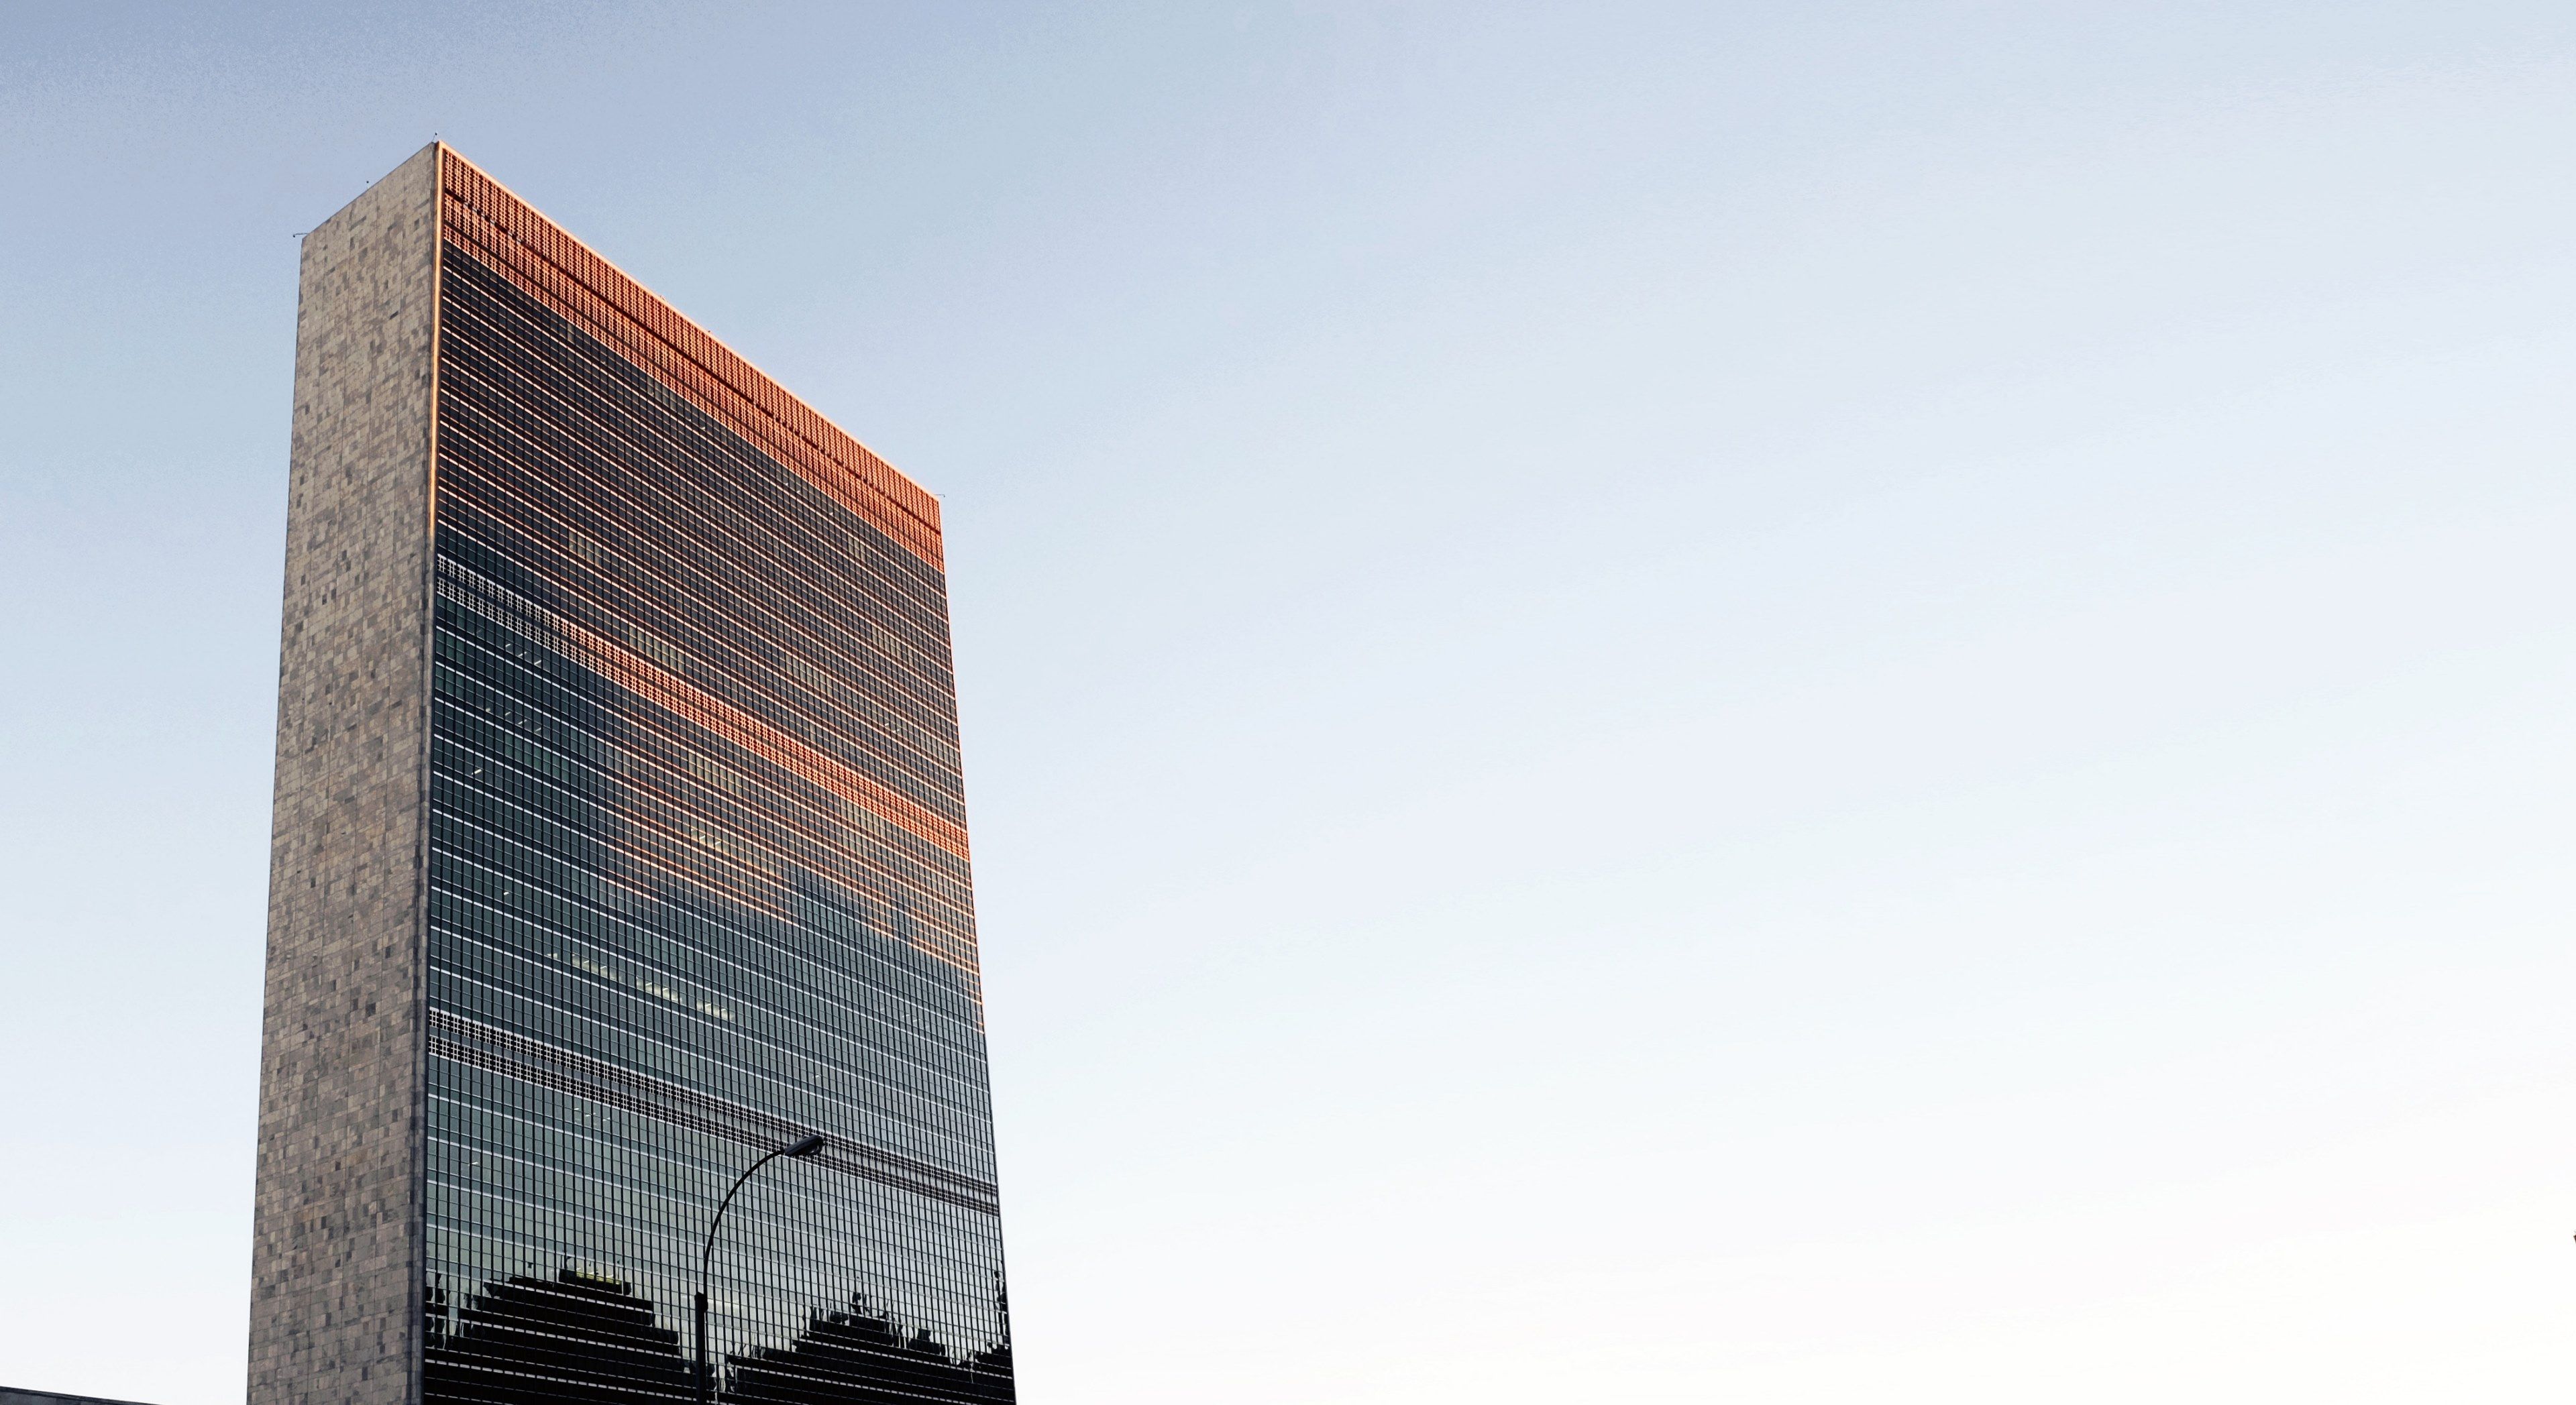 Wallpaper / the facade of the united nations headquarters in new york city, sunset over un building 4k wallpaper